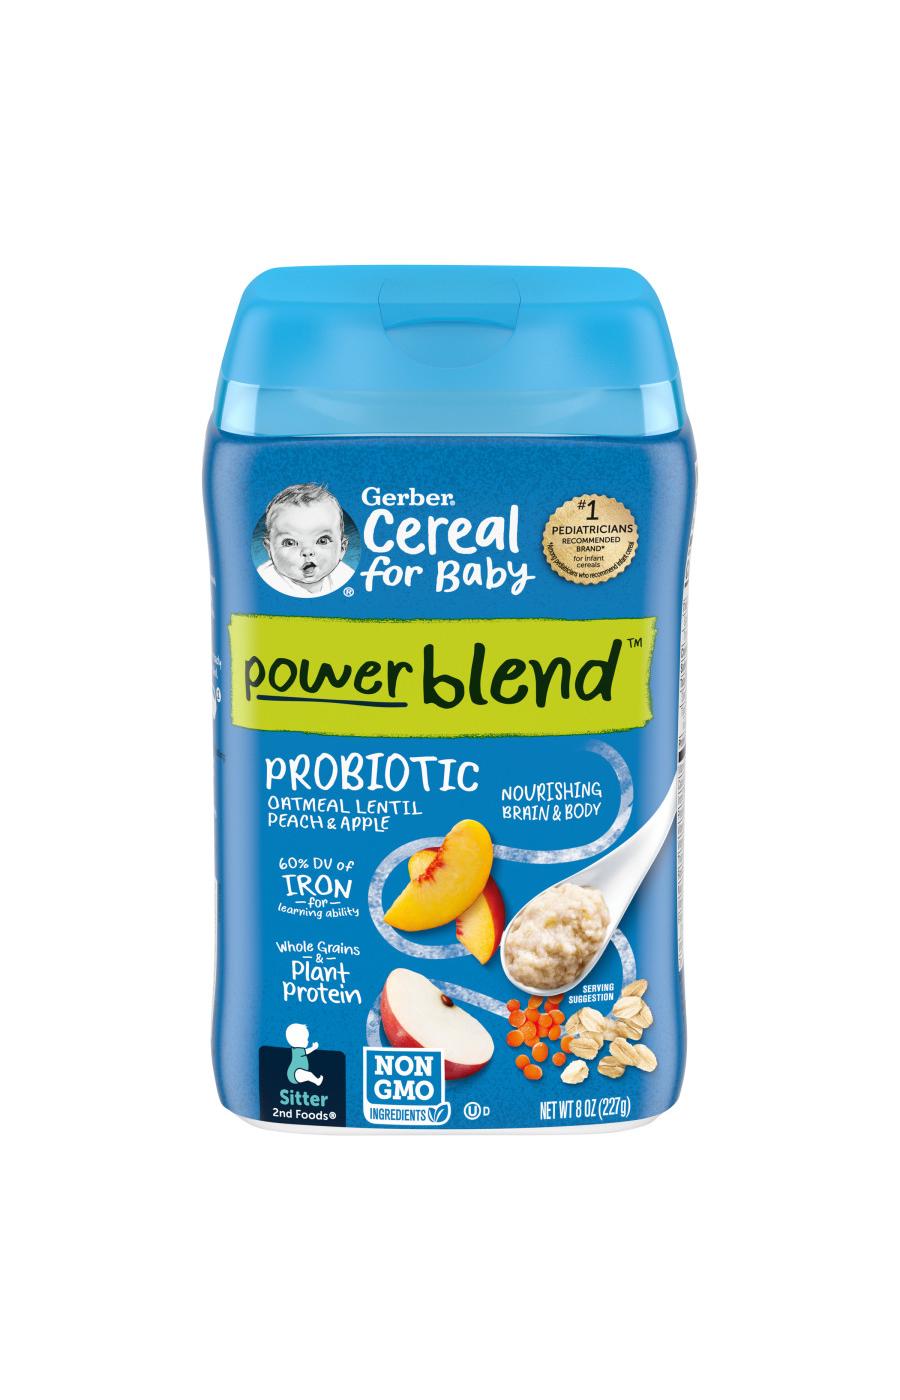 Gerber Cereal for Baby PowerBlend Probiotic - Oatmeal Lentil Peach & Apple; image 1 of 7